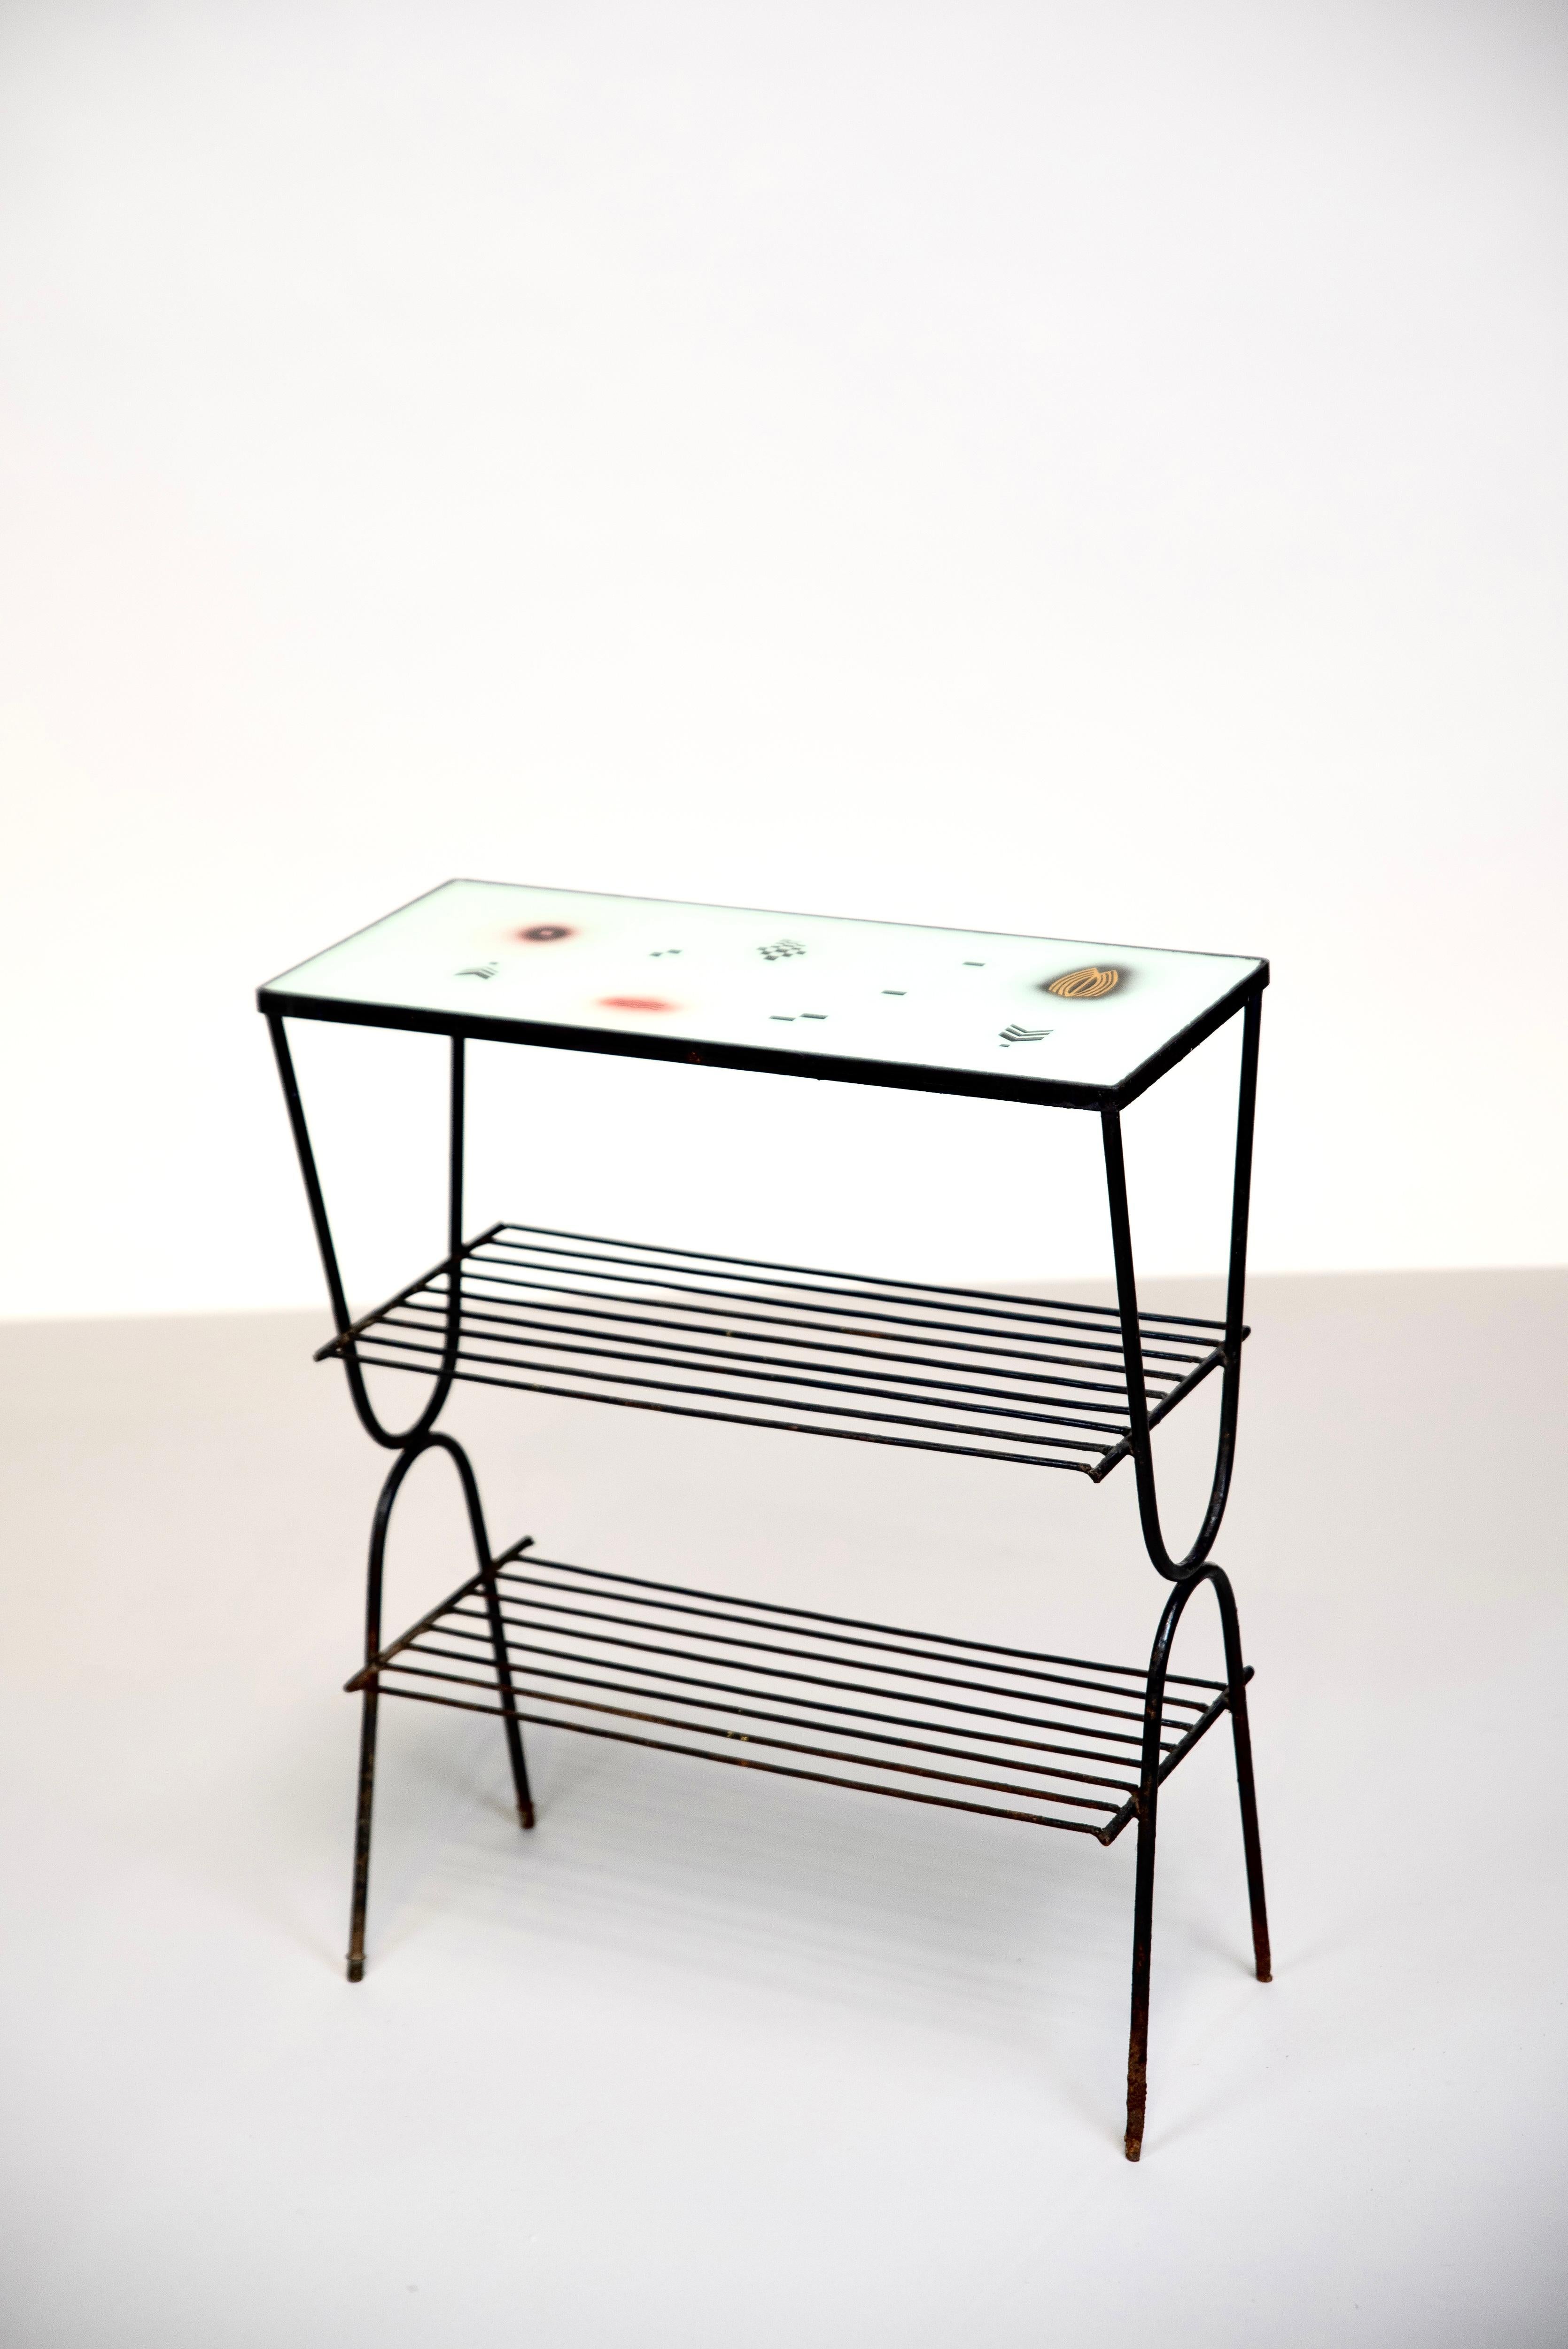 Abraham Palatnik, an essential figure in cinematic art in Brazil, made this very original console in 1961. Resting on four legs and a structure with two iron trays, plus another upper painted glass top, material and technique preferred by the